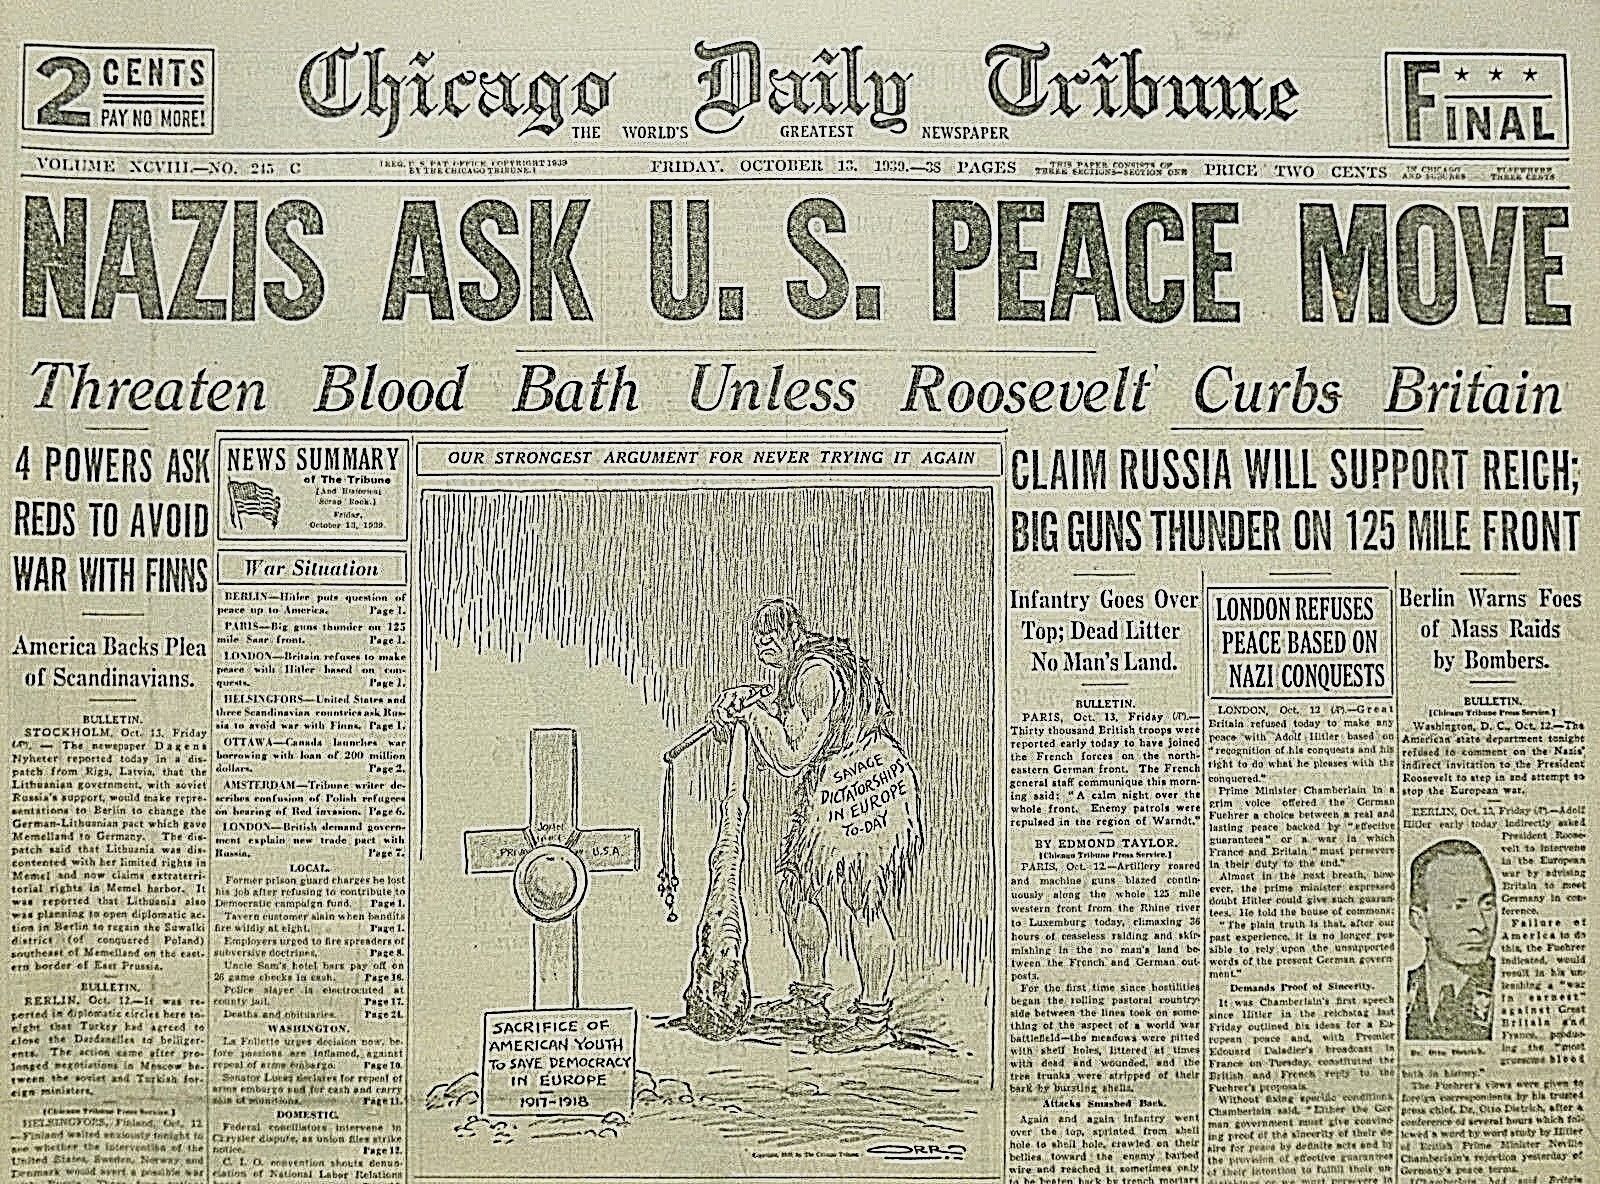 10-1939 WWII October 13 GERMANS ASK U.S. PEACE MOVE. CLAIM RUSSIA SUPPORT REICH